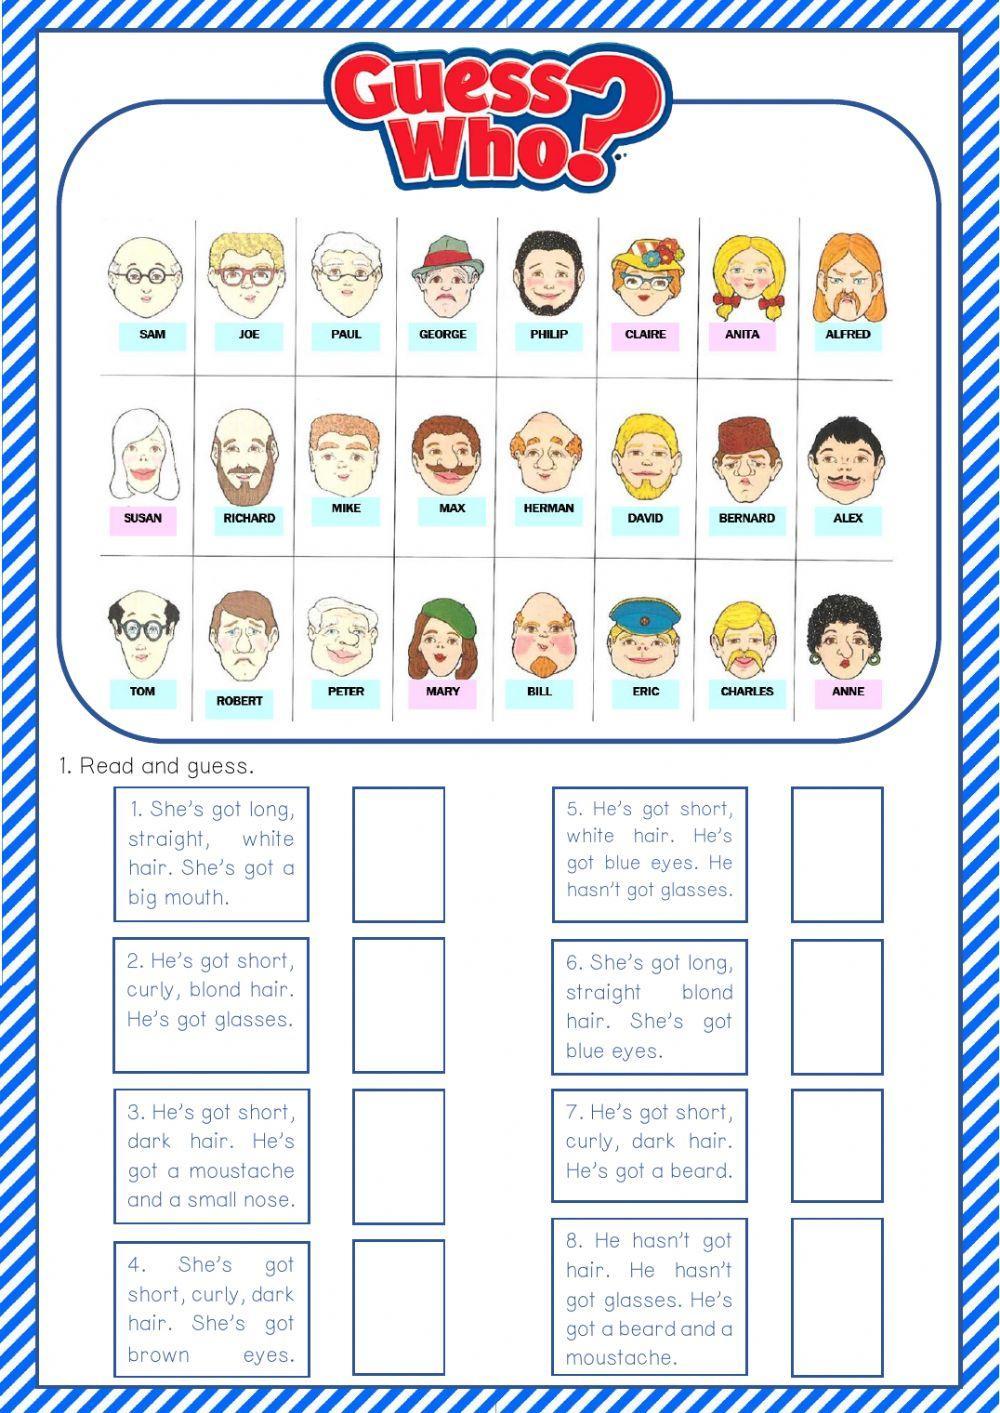 Guess who | Live Worksheets